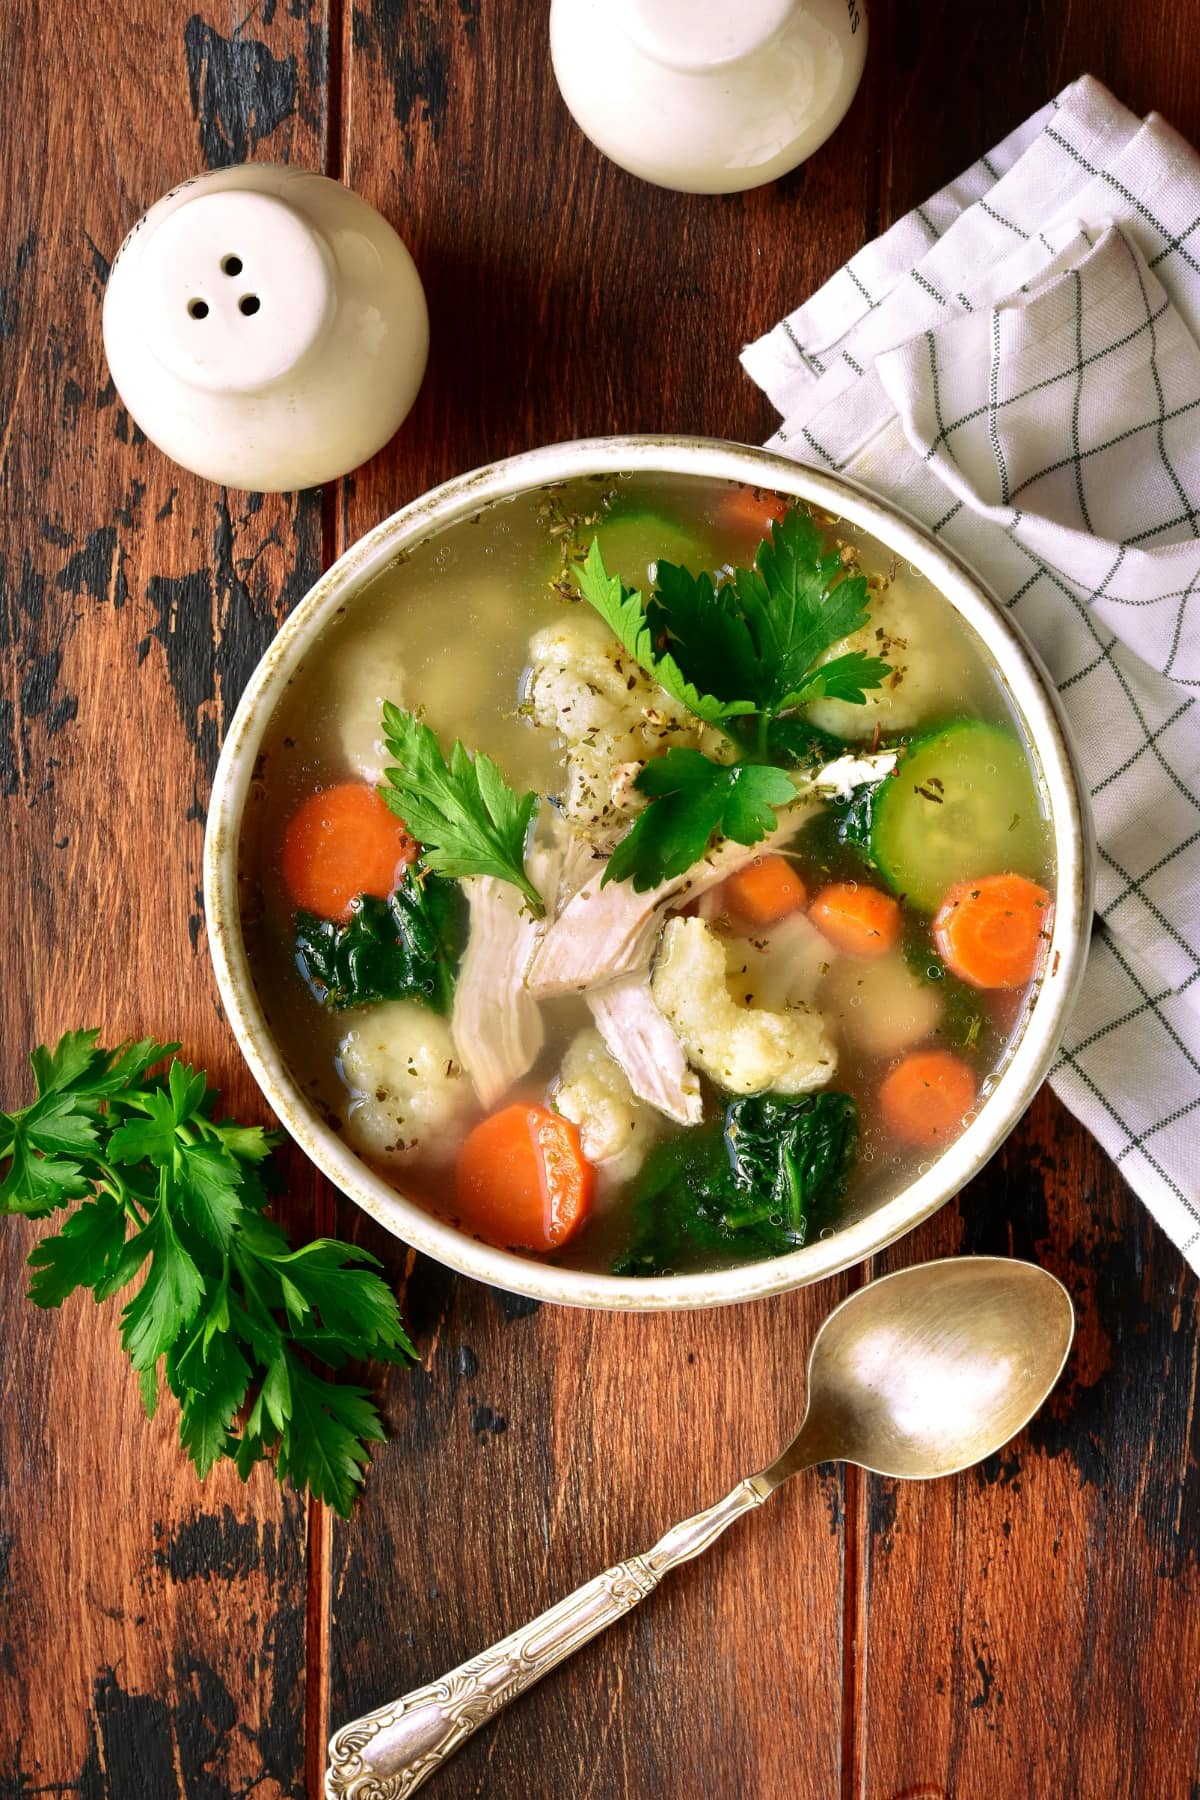 23 Easy Homemade Vegetable Soup Recipes - Insanely Good